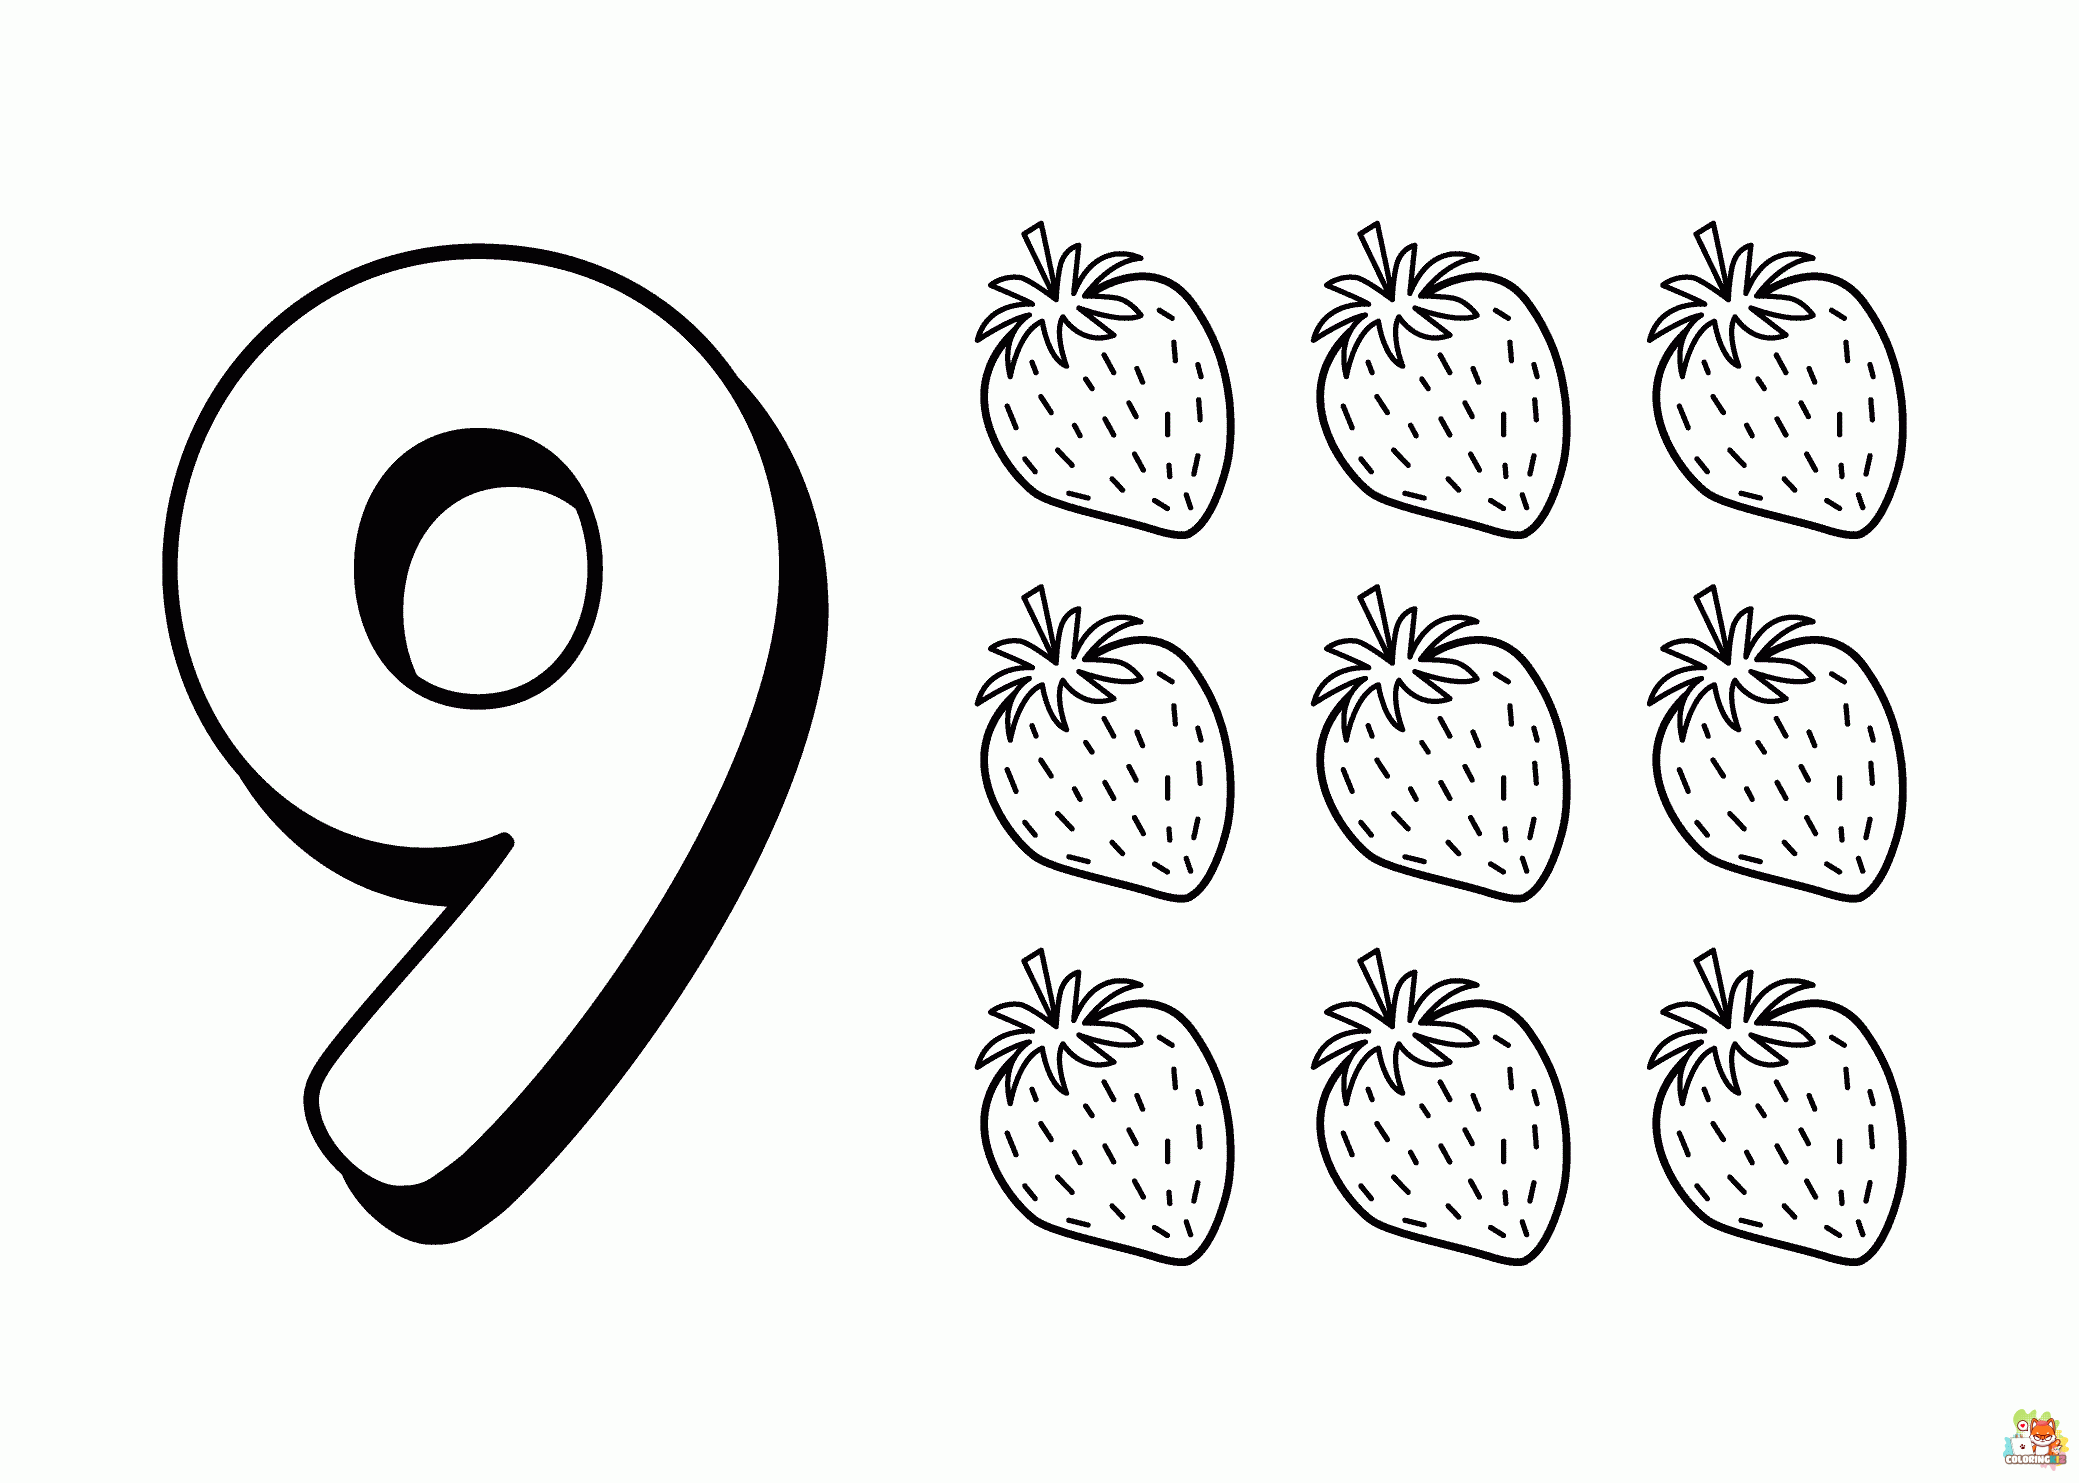 Printable Number 9 coloring sheets